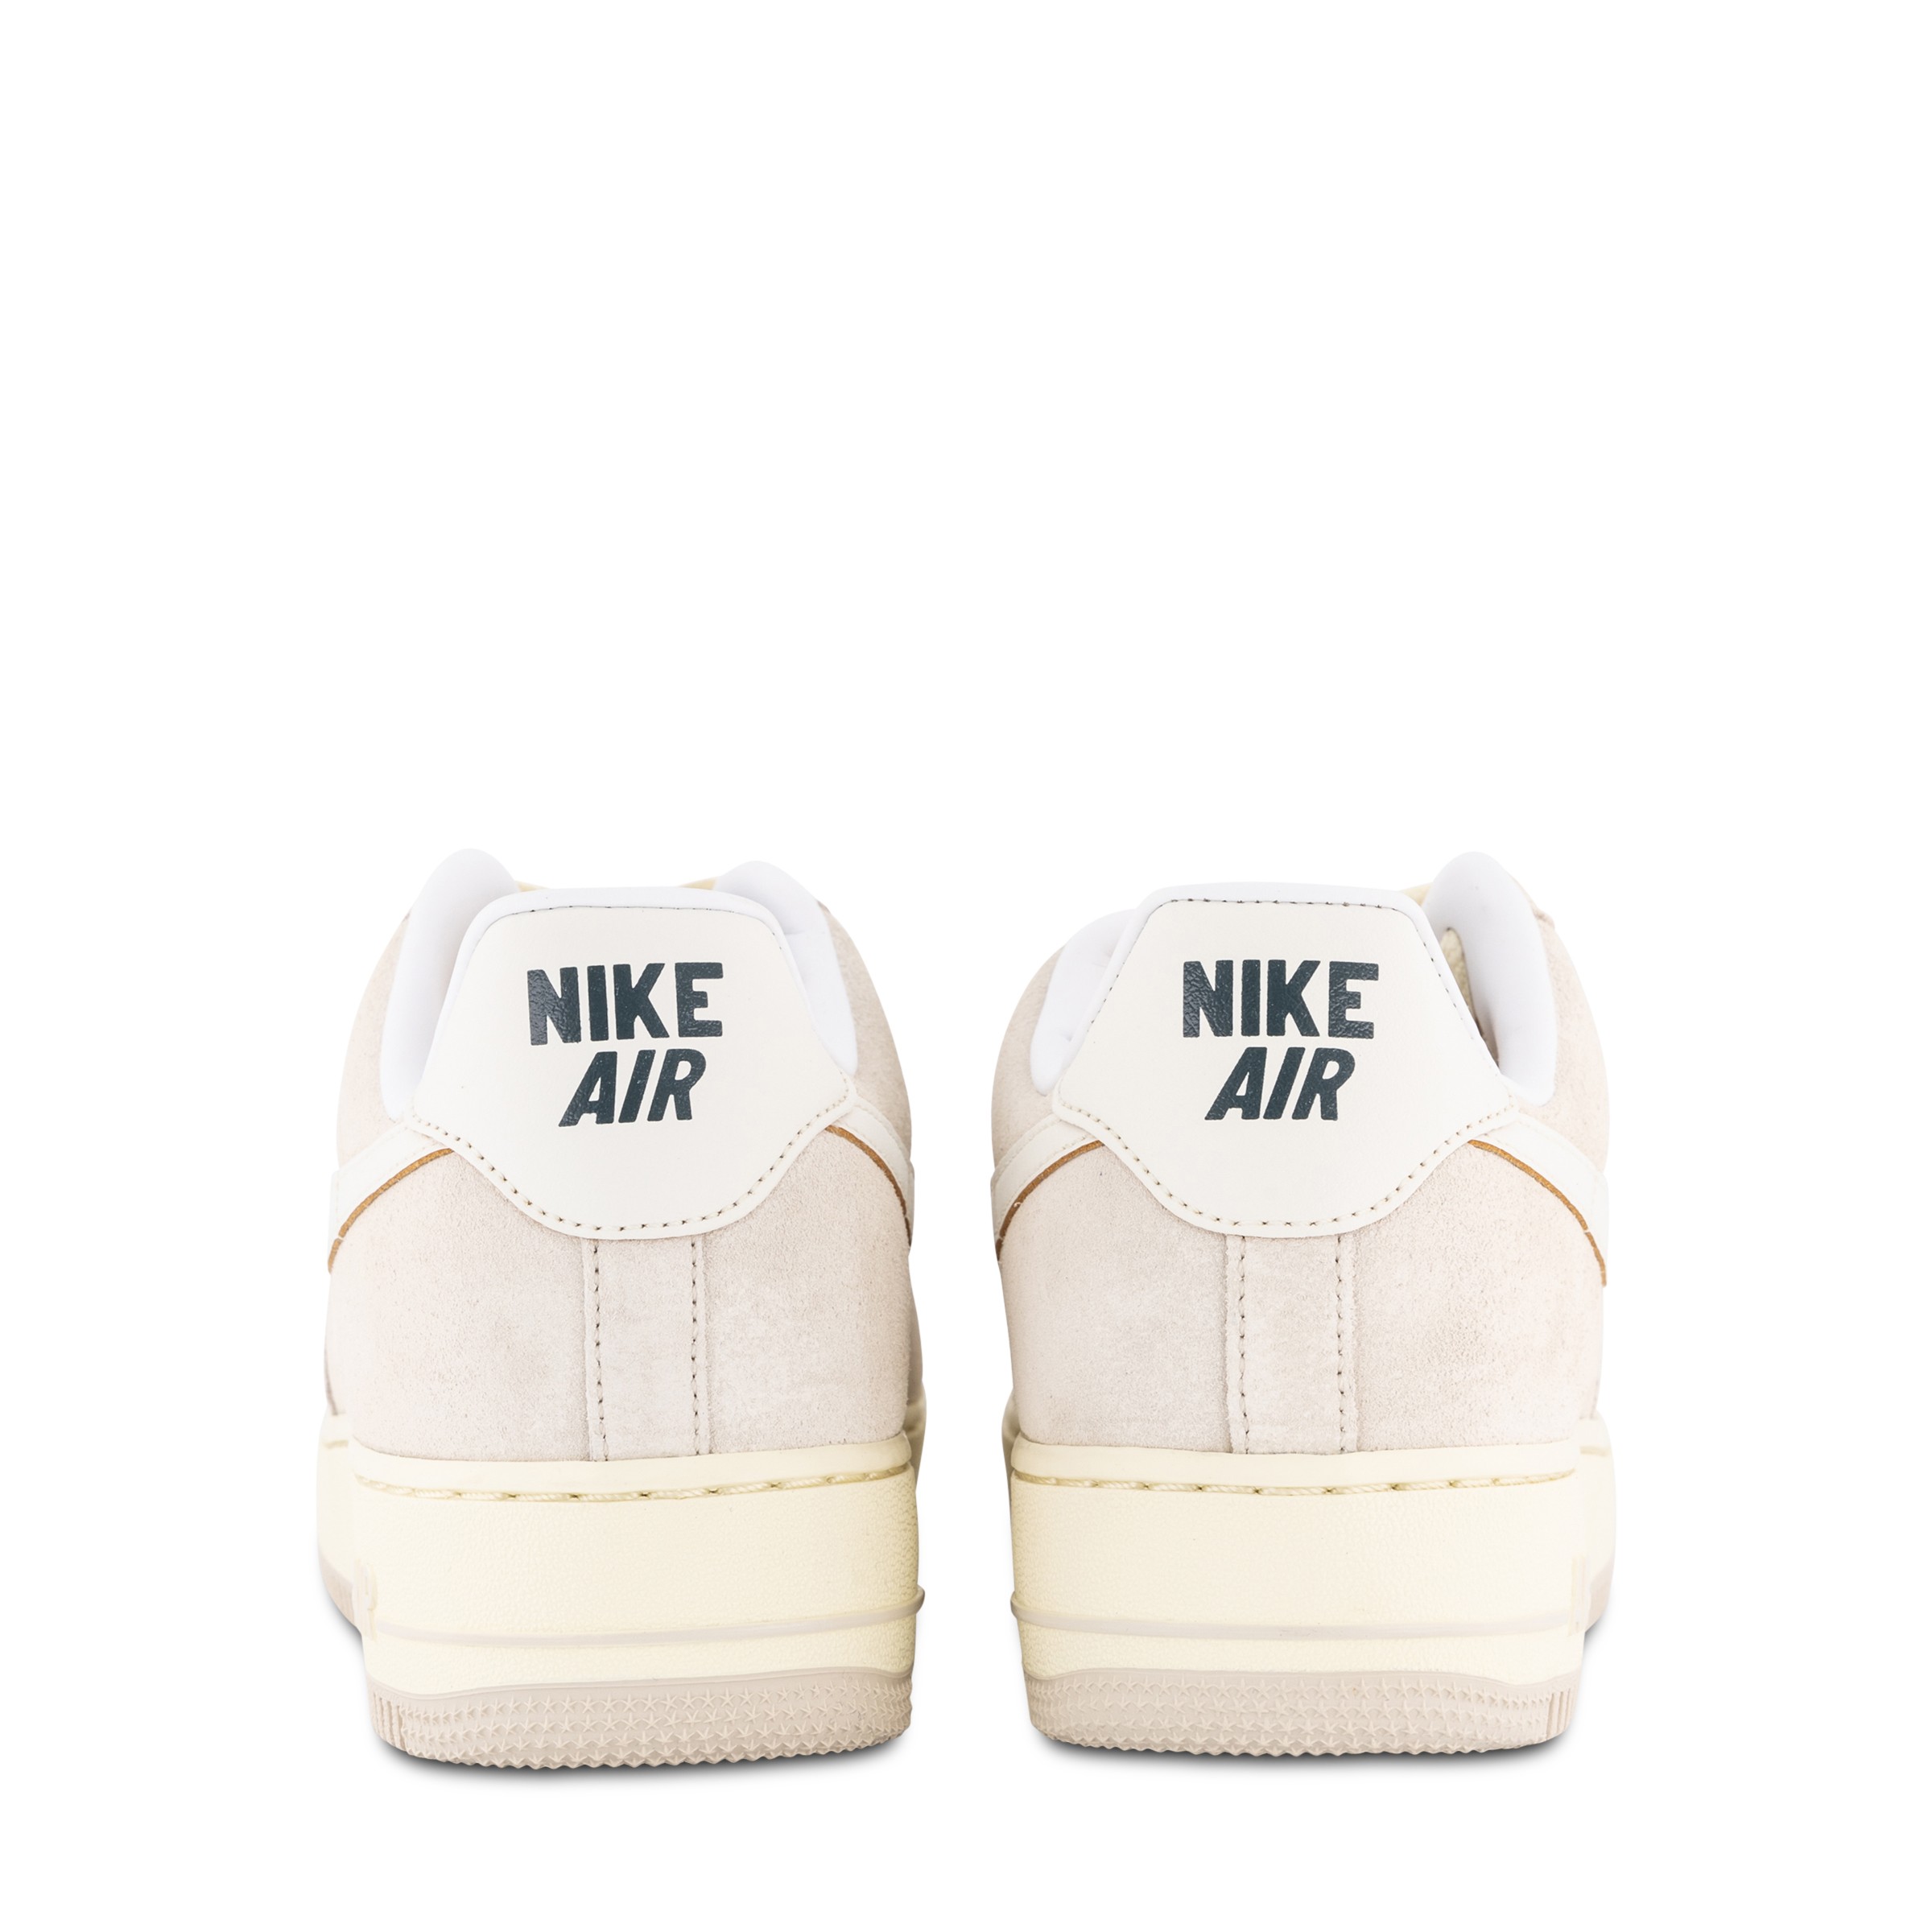 Nike Air Force 1'07 Sneakers In Off White Suede